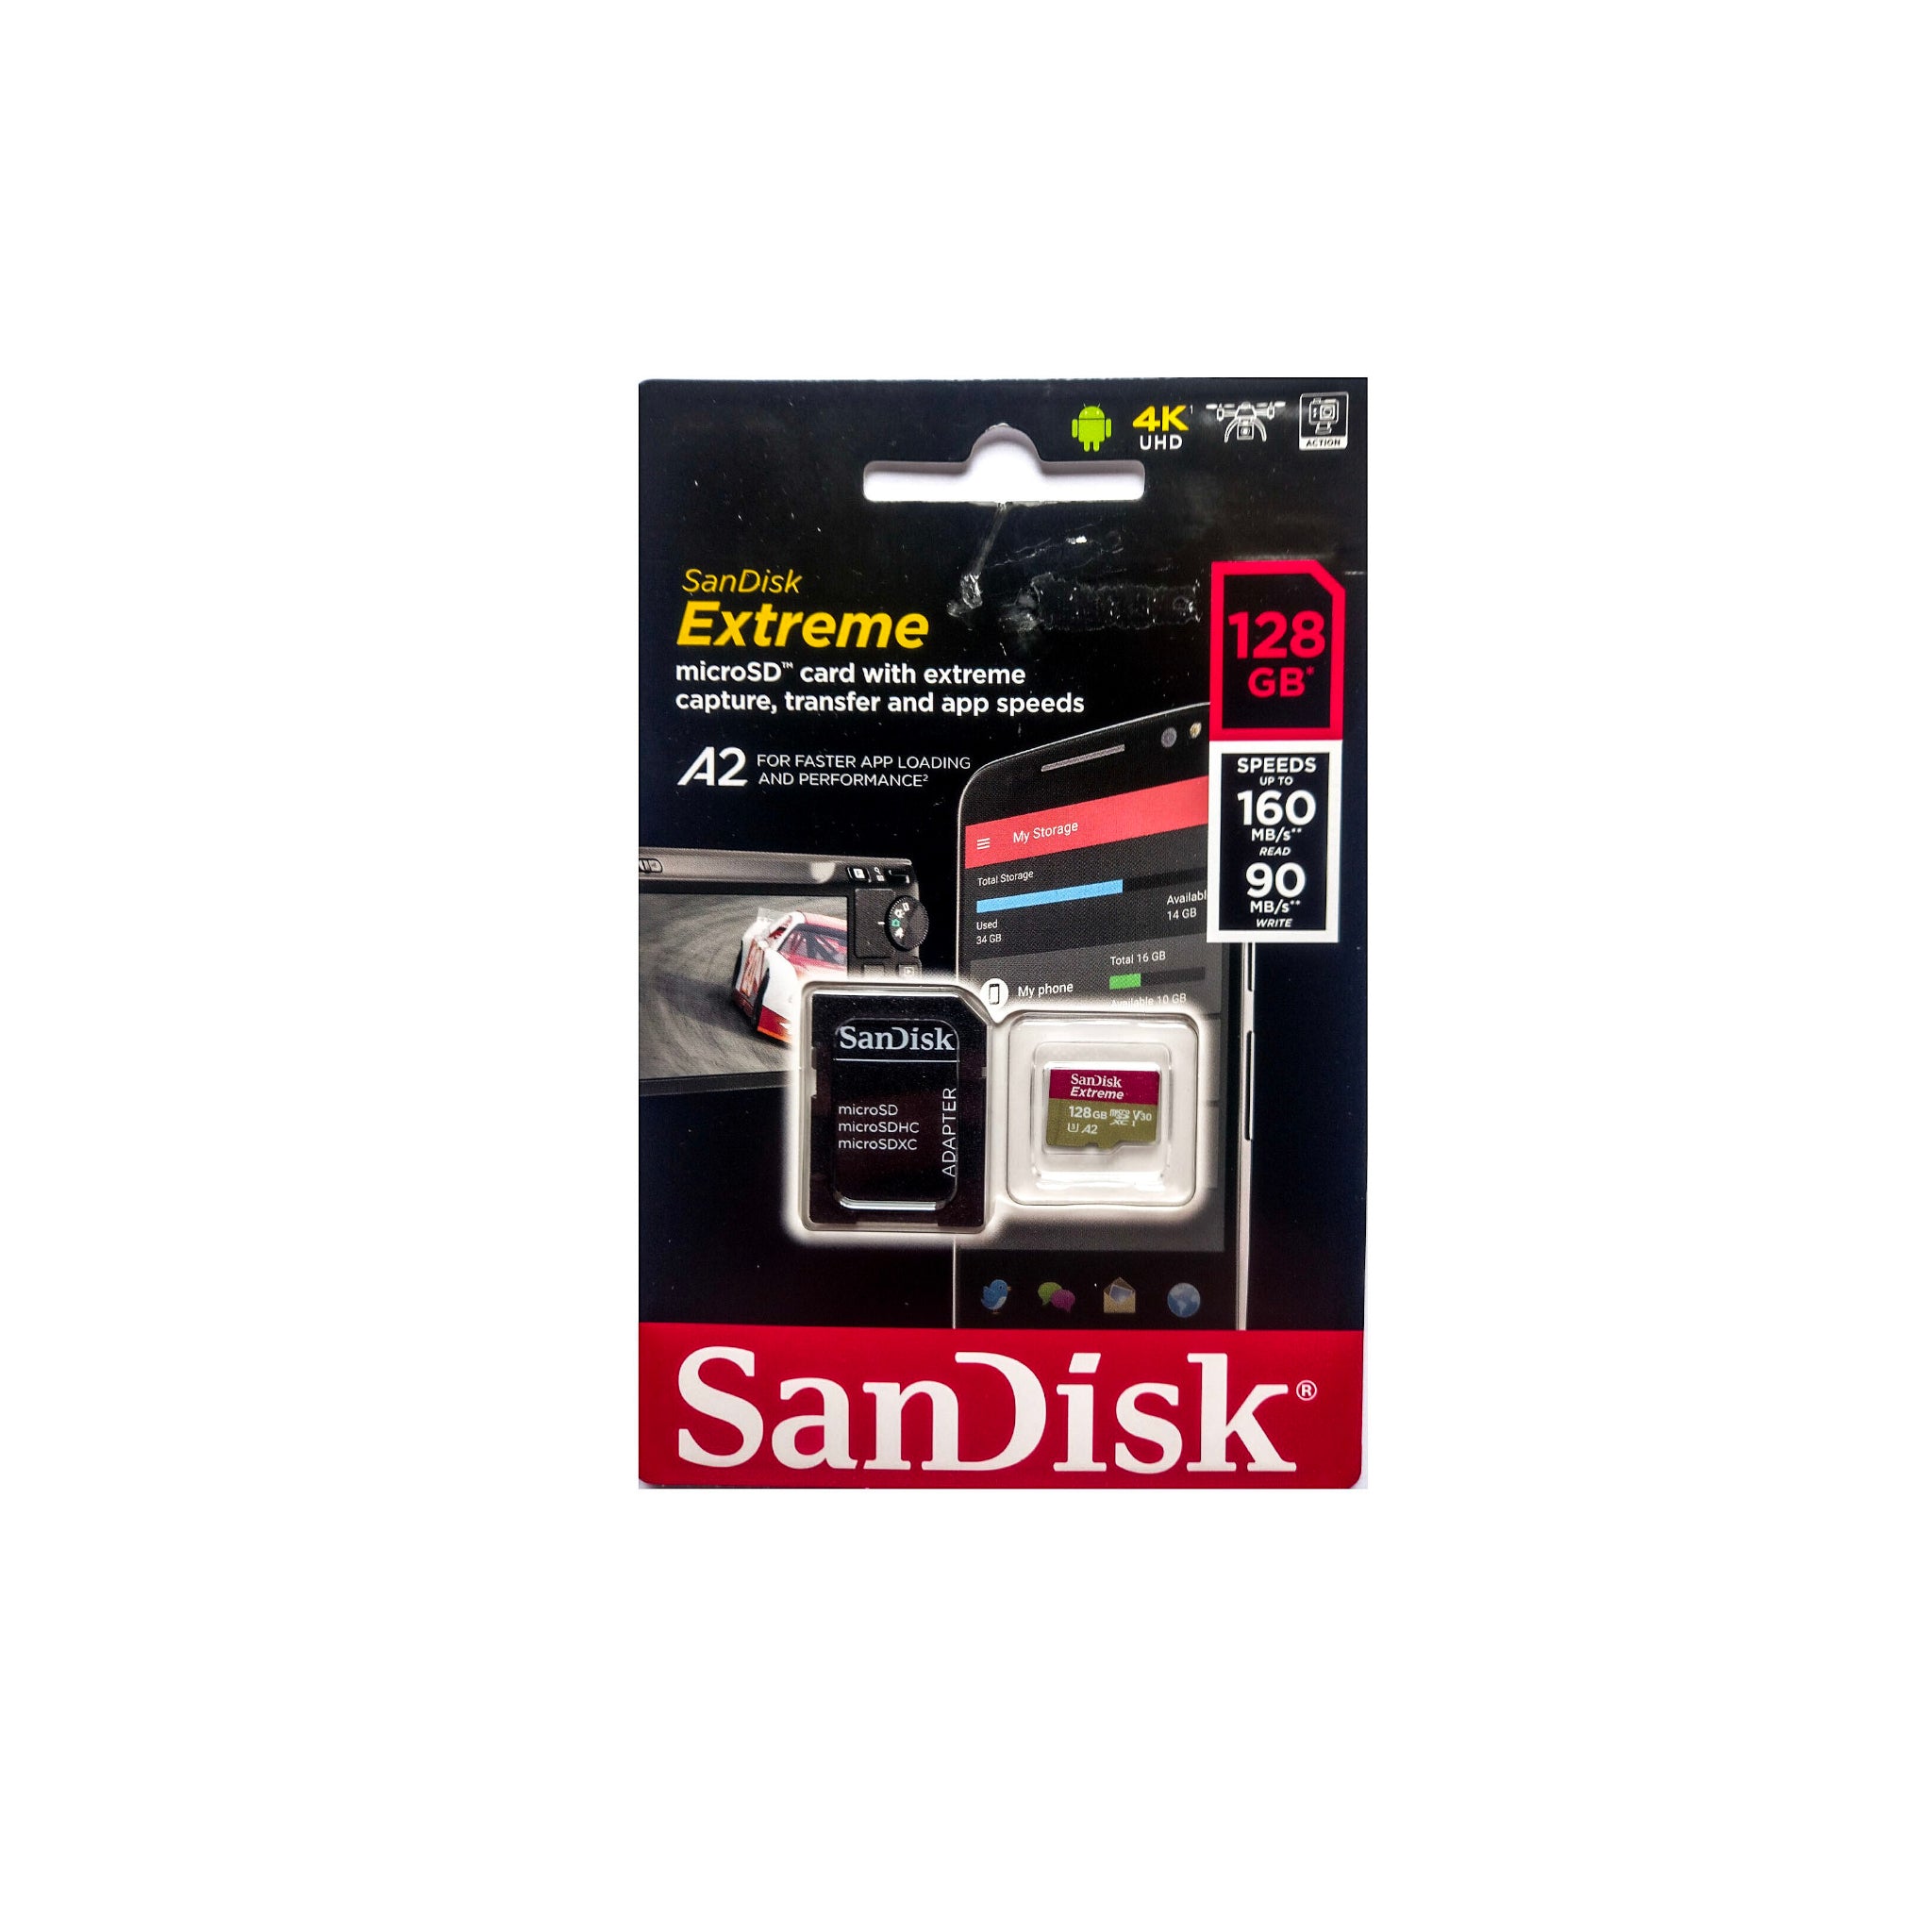 Sandisk 128 GB Micro SD Card Extreme